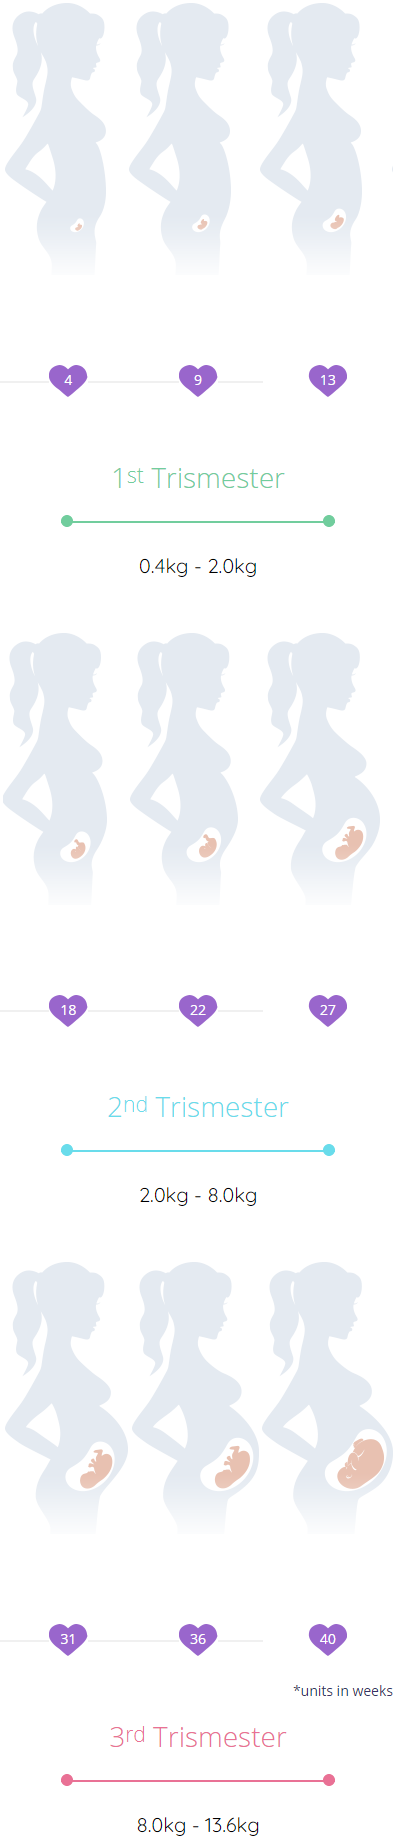 Surrogacy with frozen embryo transfer (FET)-Trimester Chart 2